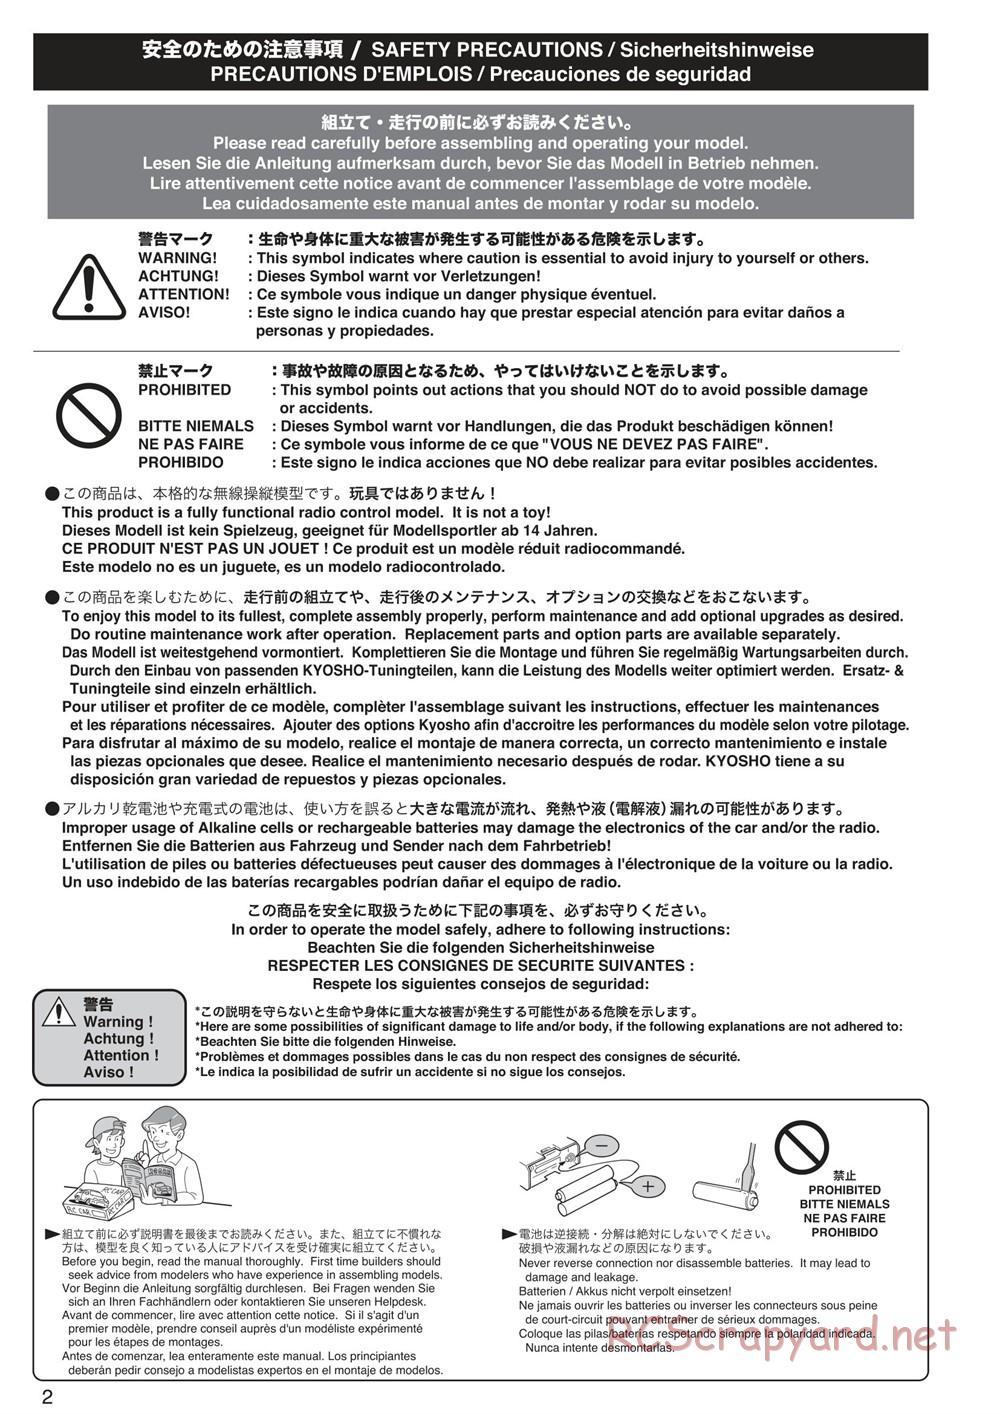 Kyosho - Mad Crusher VE - Manual - Page 2